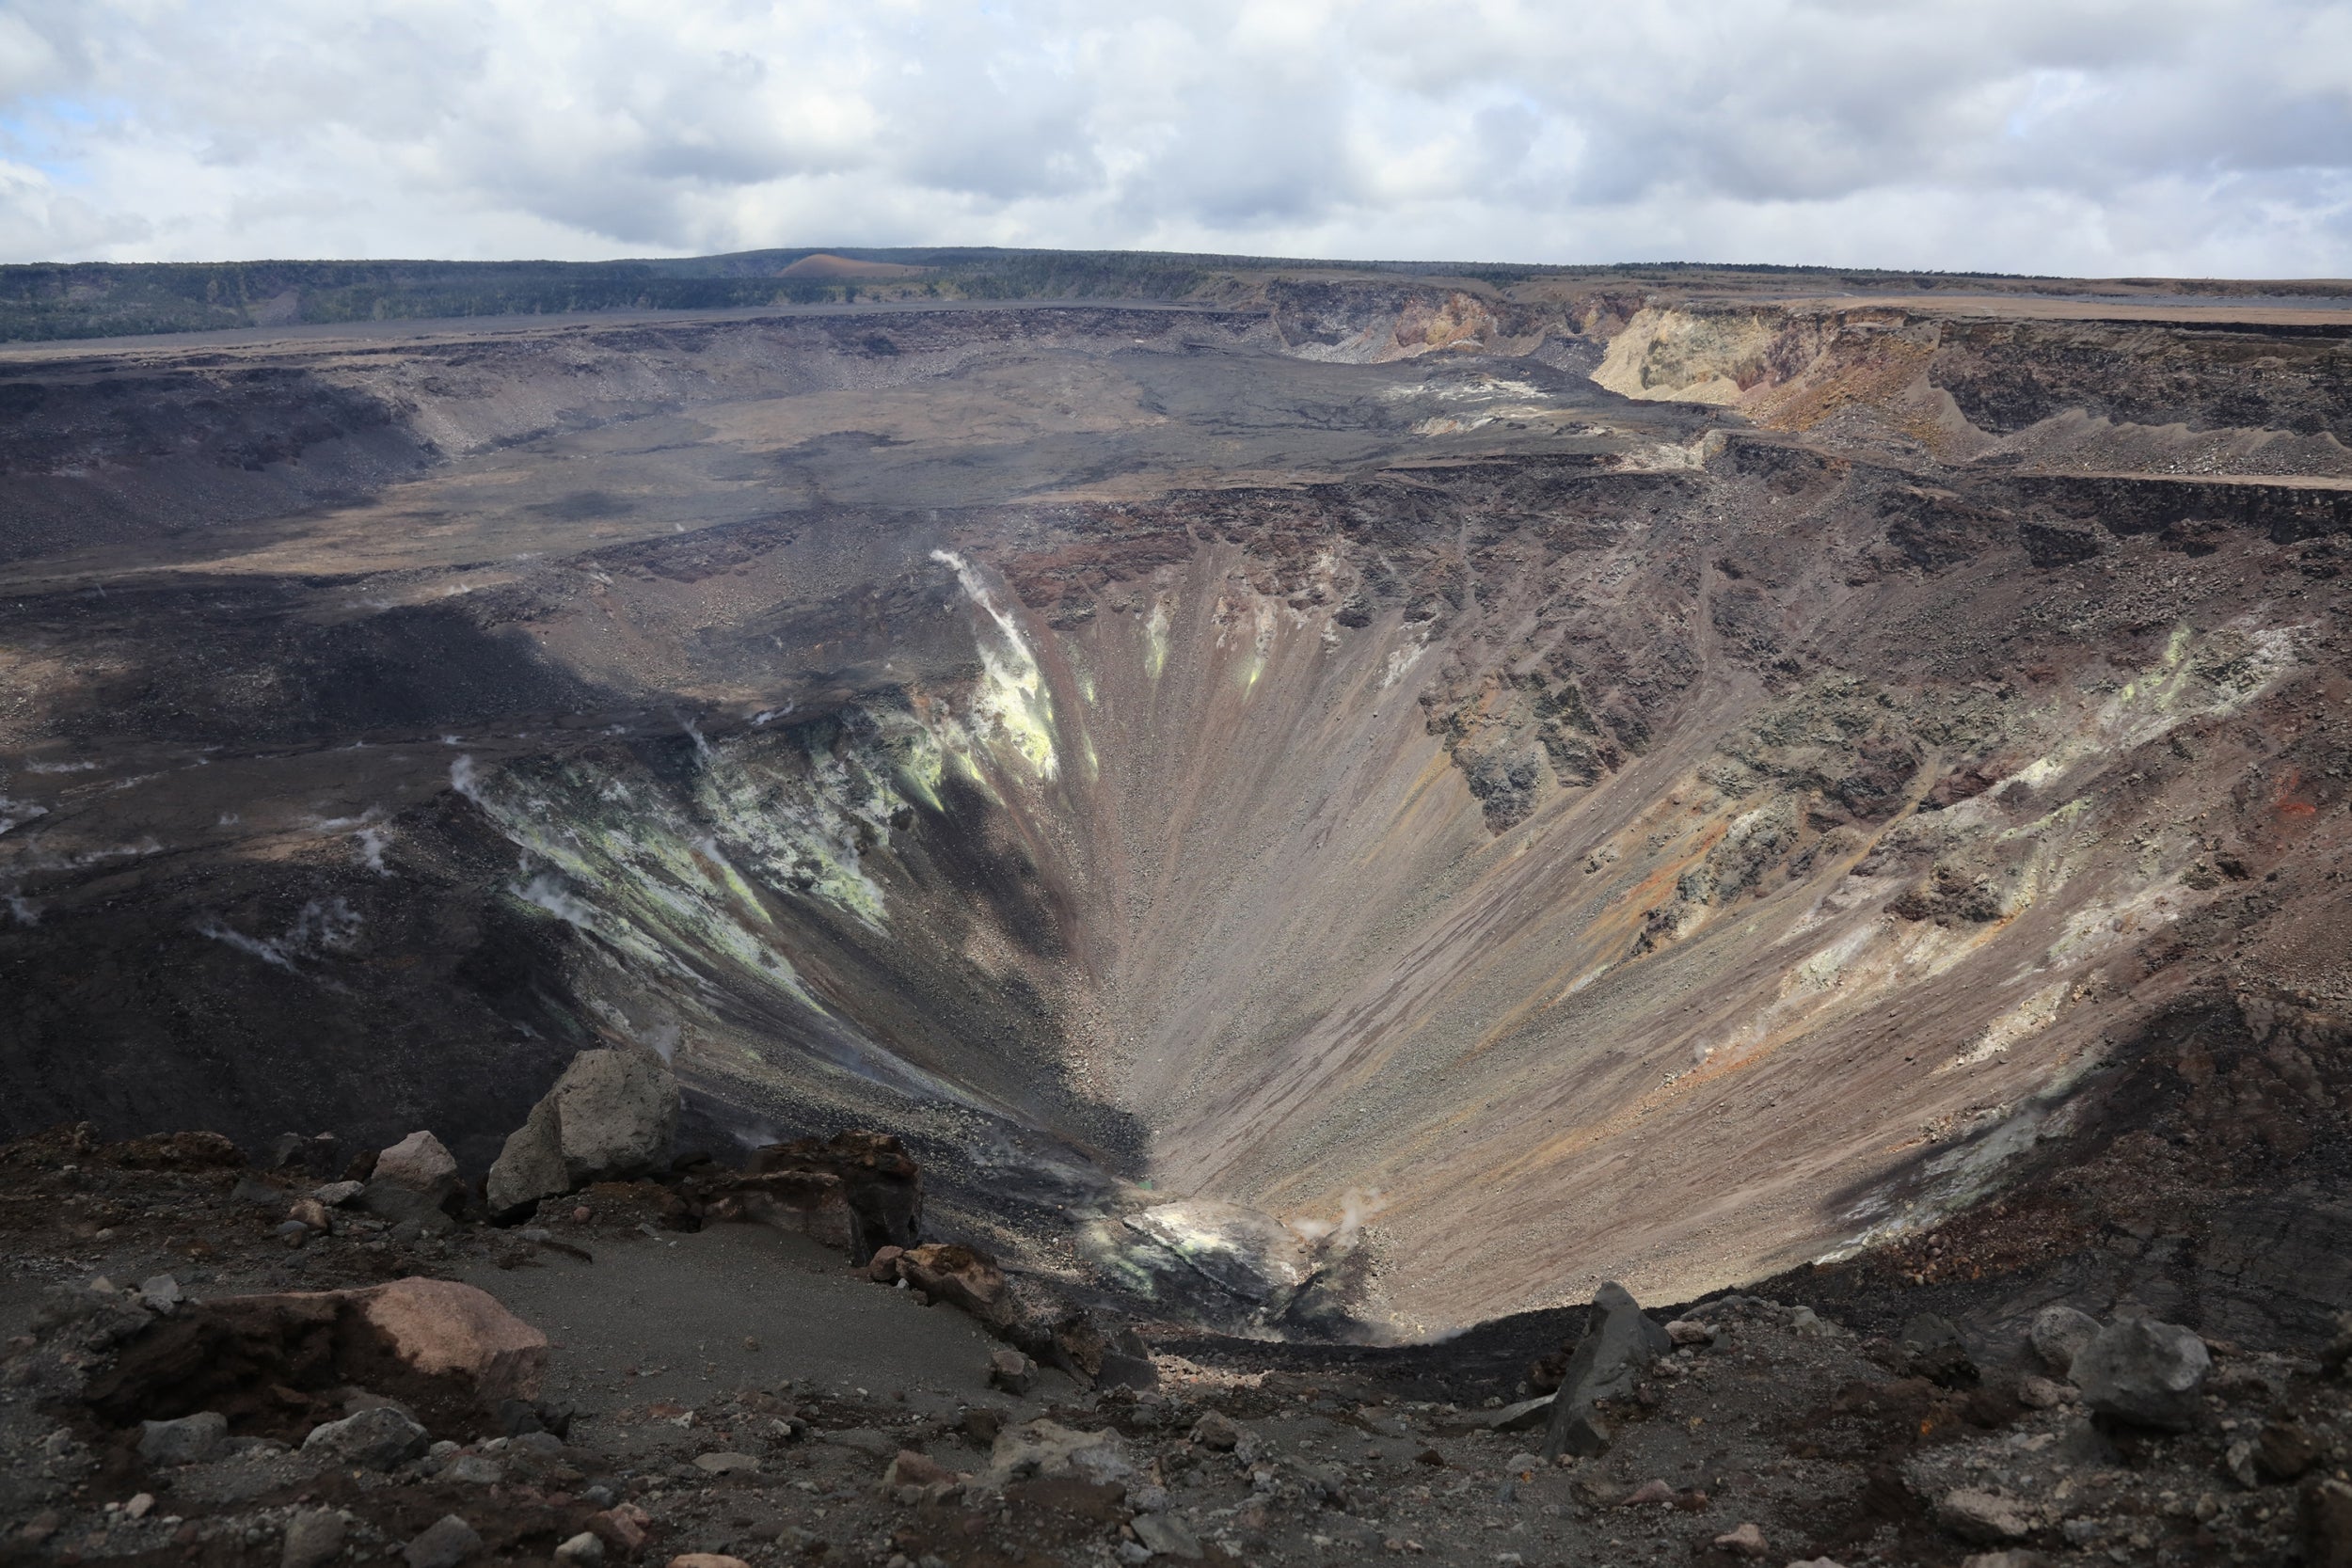 The Halema’uma’u summit crater after the magma drained away